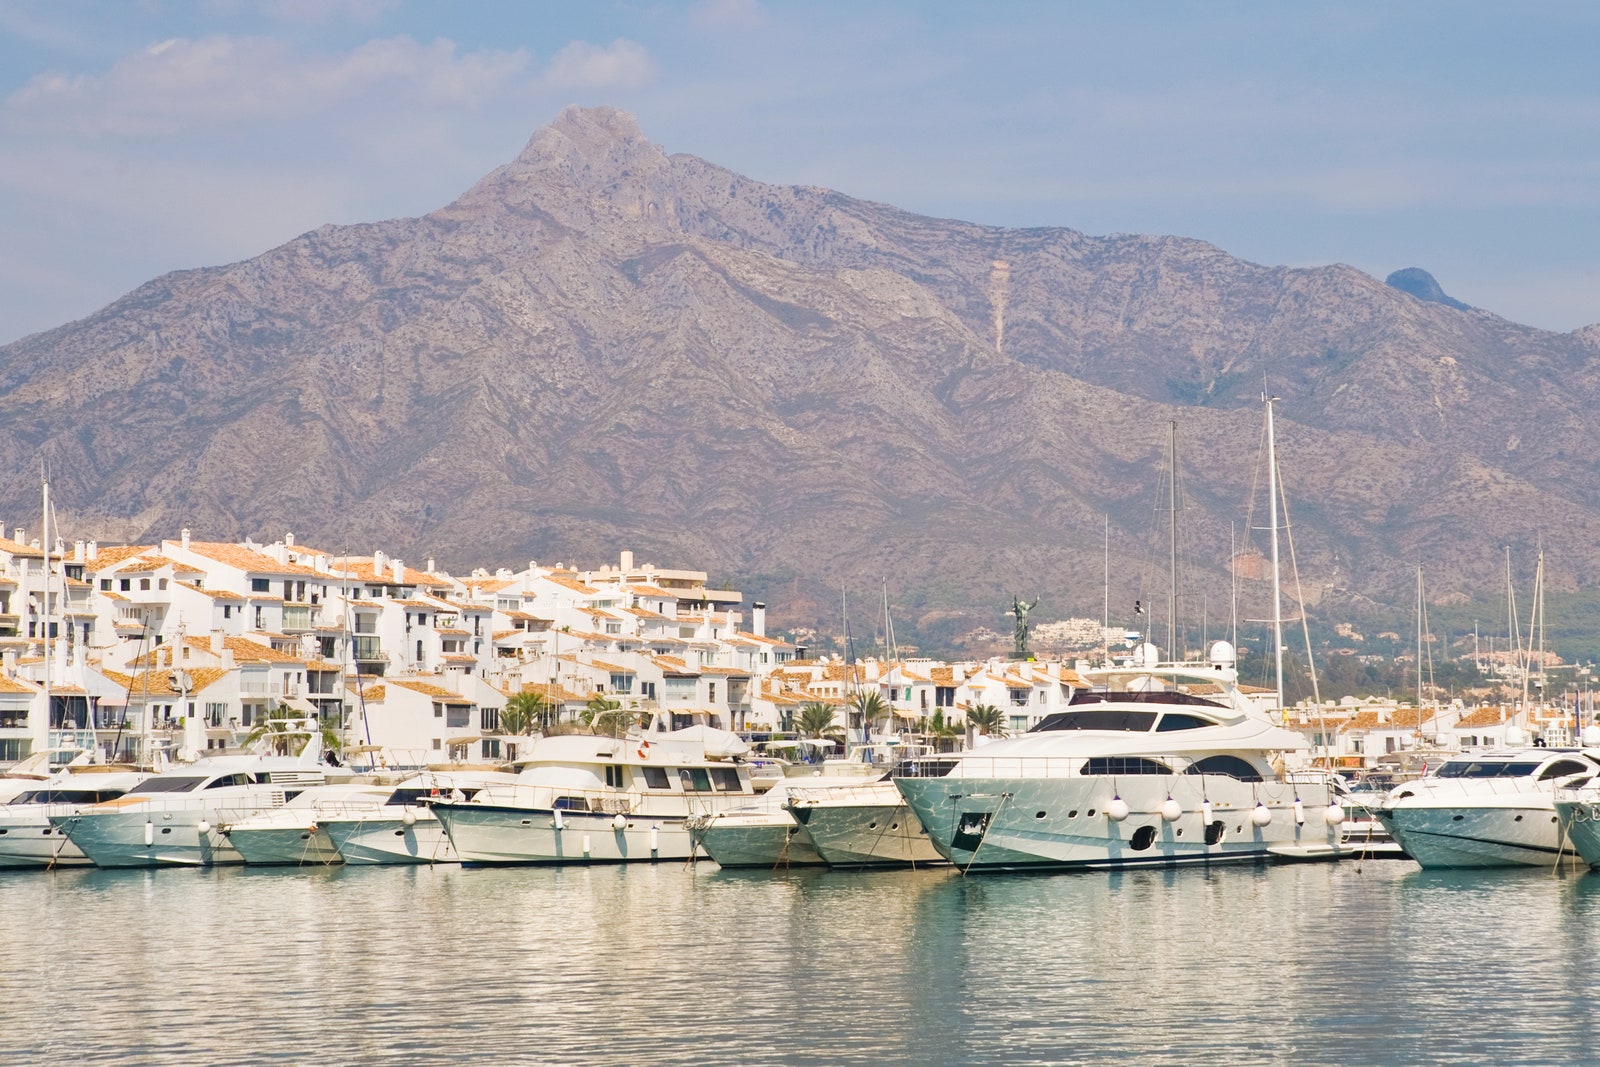 Puerto Jos Banús more commonly known as Puerto Banús is a marina to the west of Marbella Spain on the Costa del Sol.